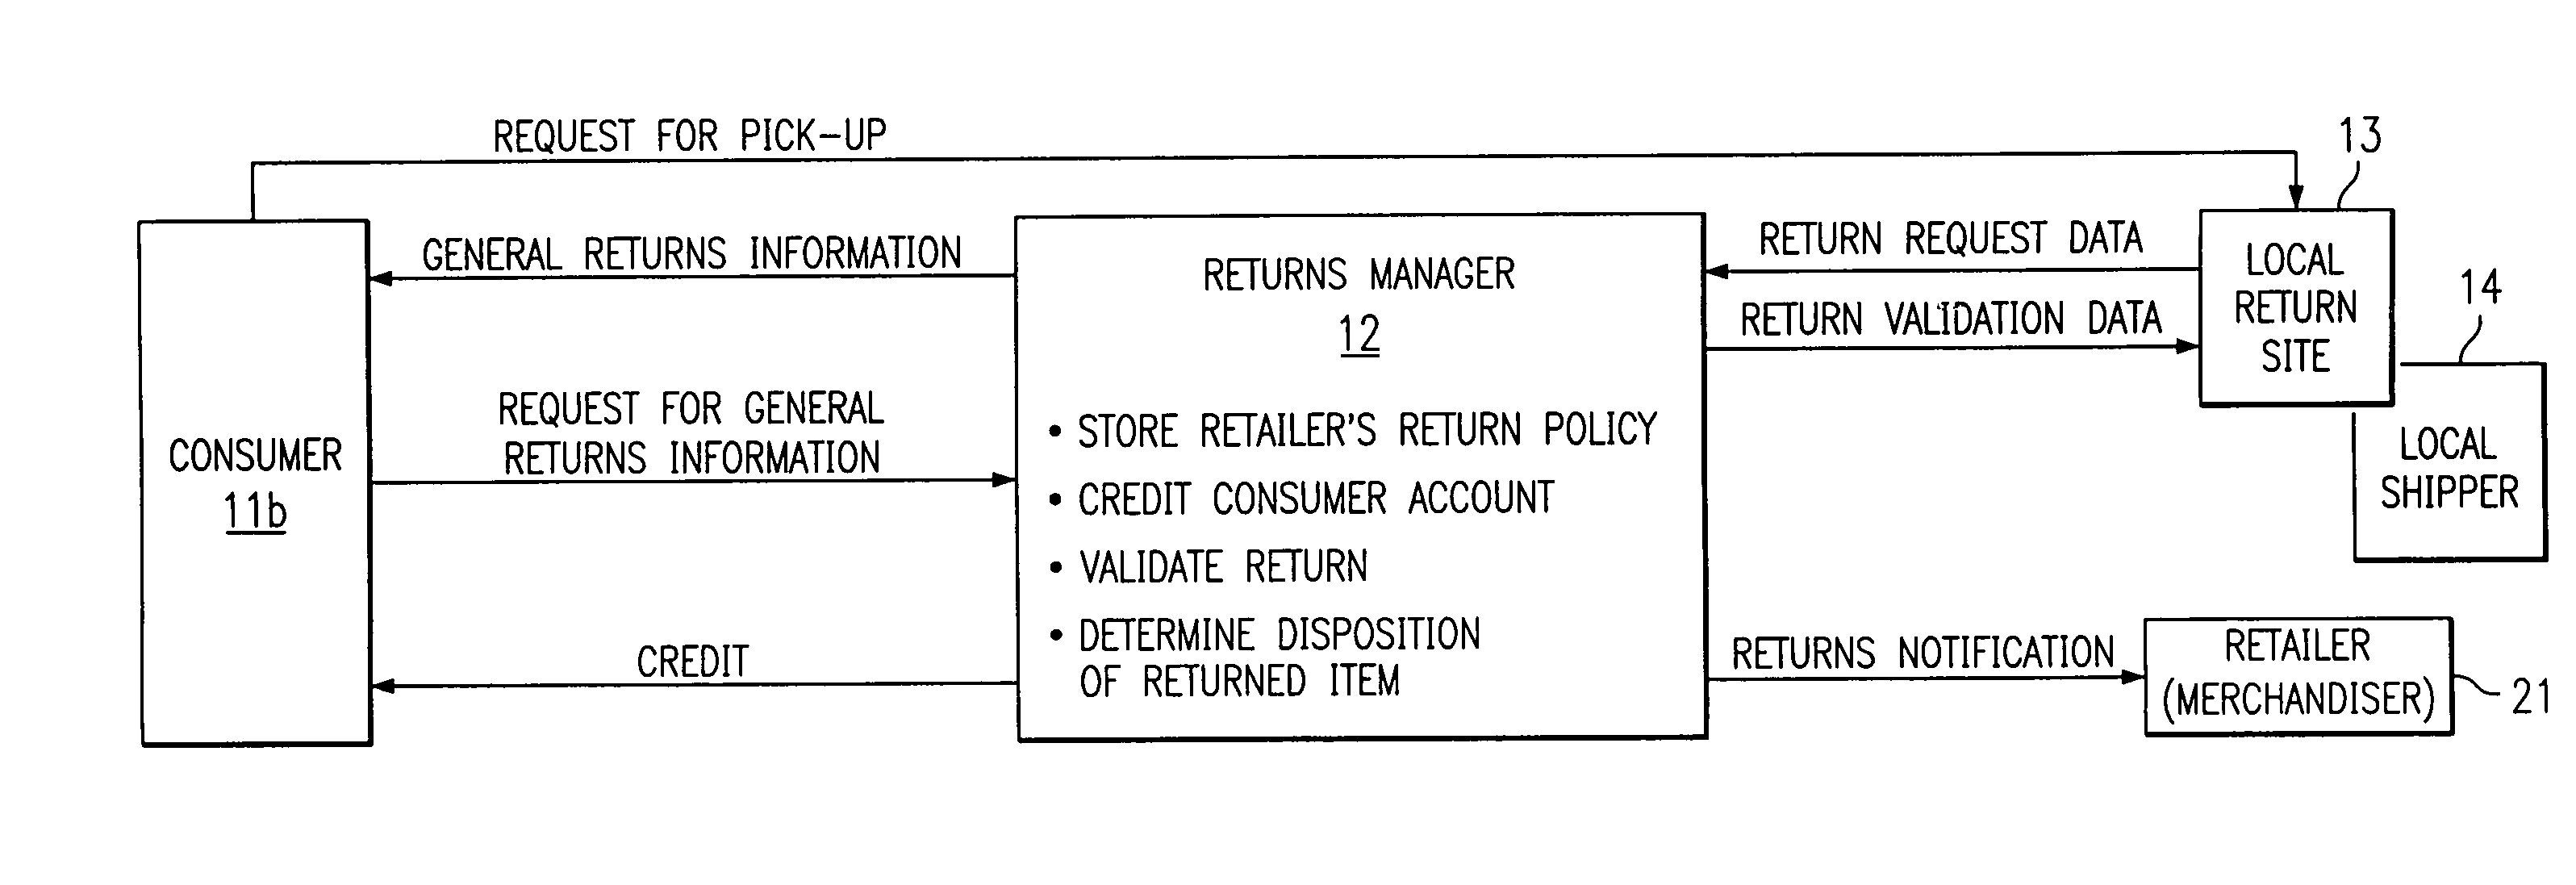 Local returns of remotely purchased merchandise with return code validation